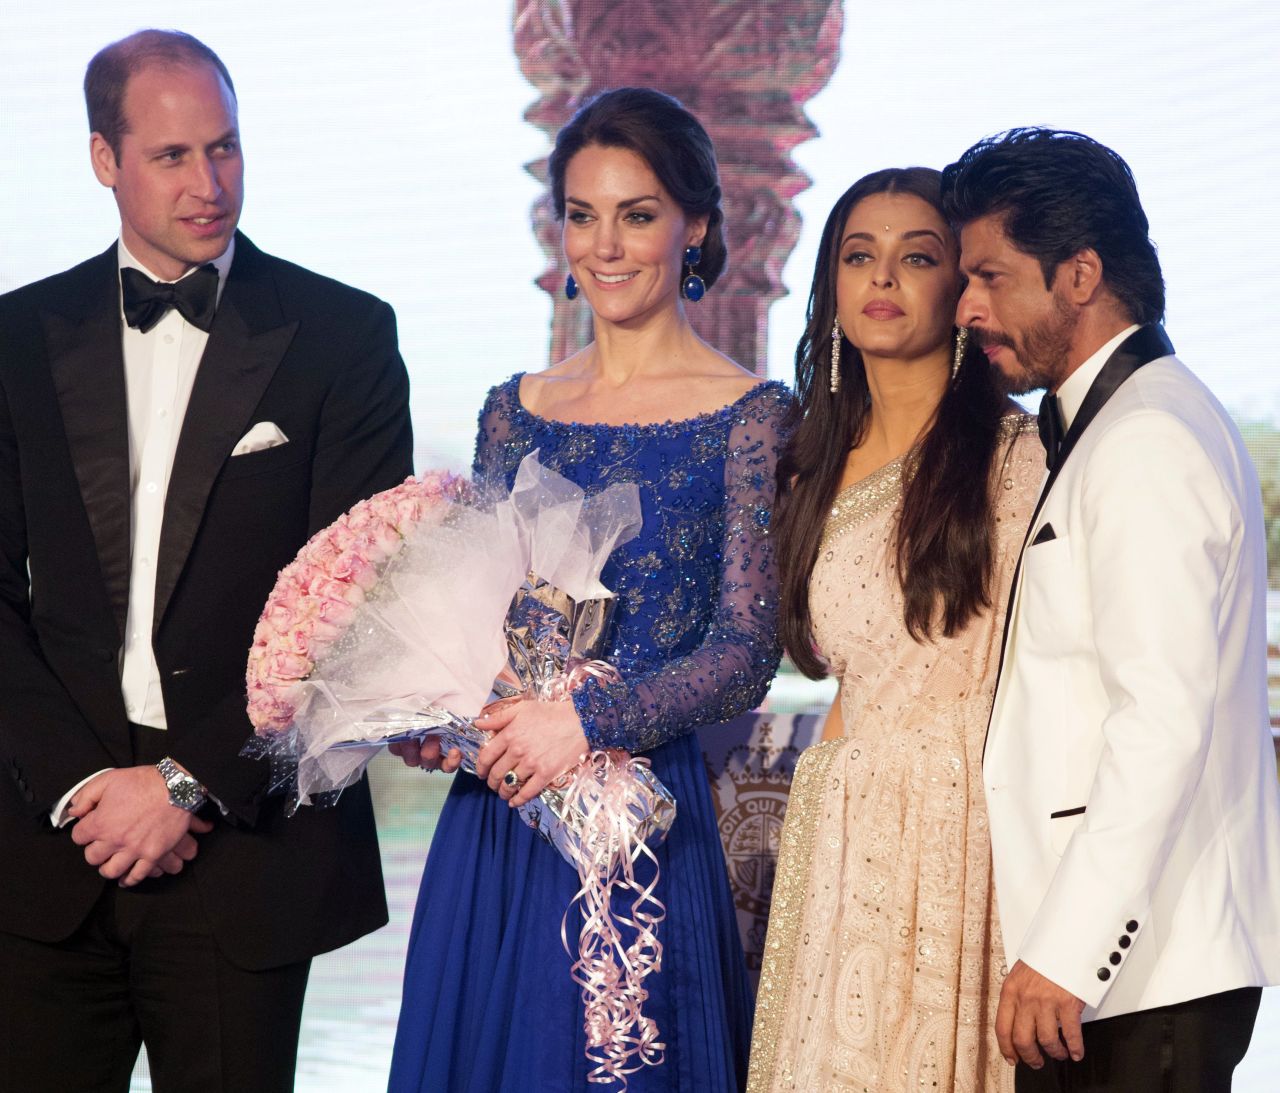 The royal couple poses on stage with actors Aishwarya Rai Bachchan, third from left, and Shah Rukh Khan at a Bollywood Charity Gala in Mumbai on April 10.